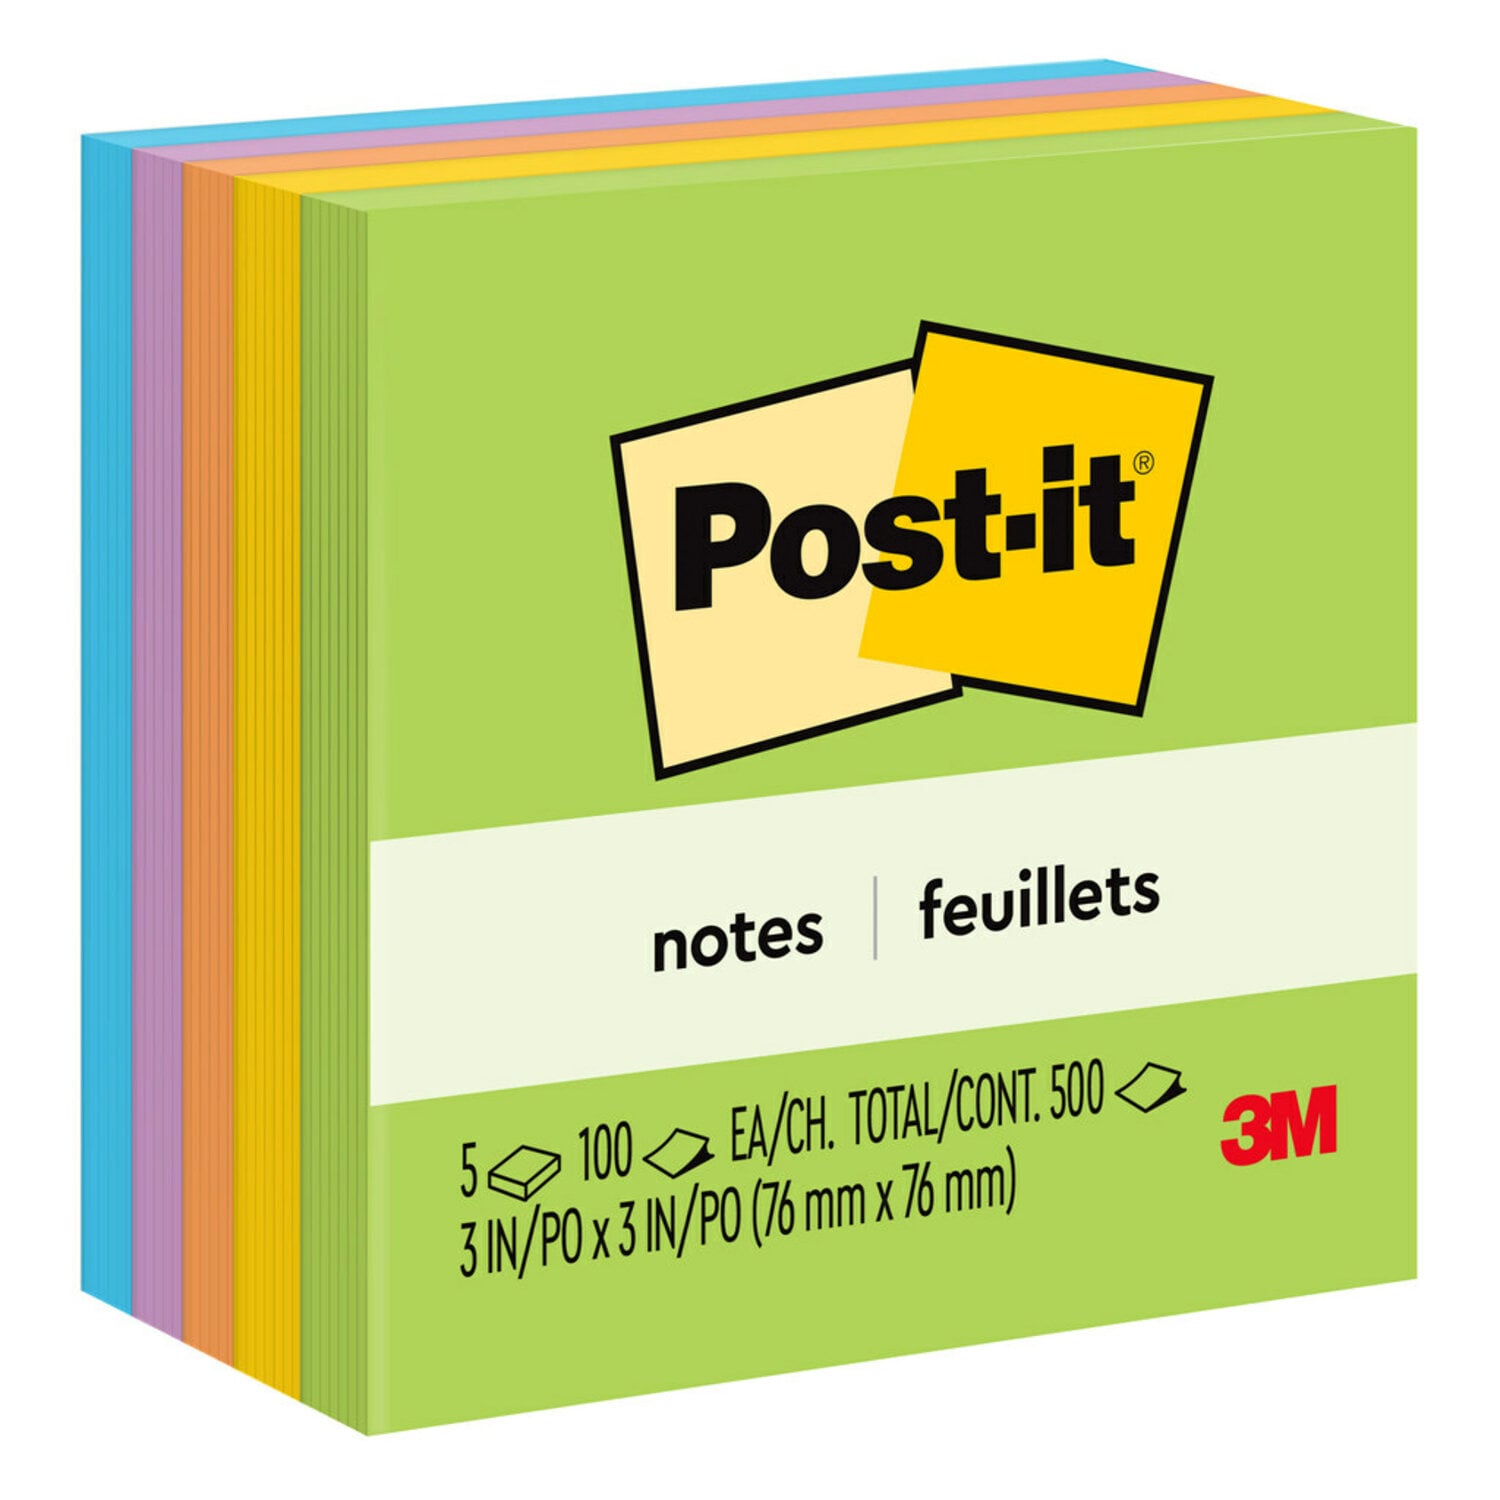 7100230248 - Post-it Notes 654-5UC, 3 in x 3 in (76 mm x 76 mm), Jaipur colors